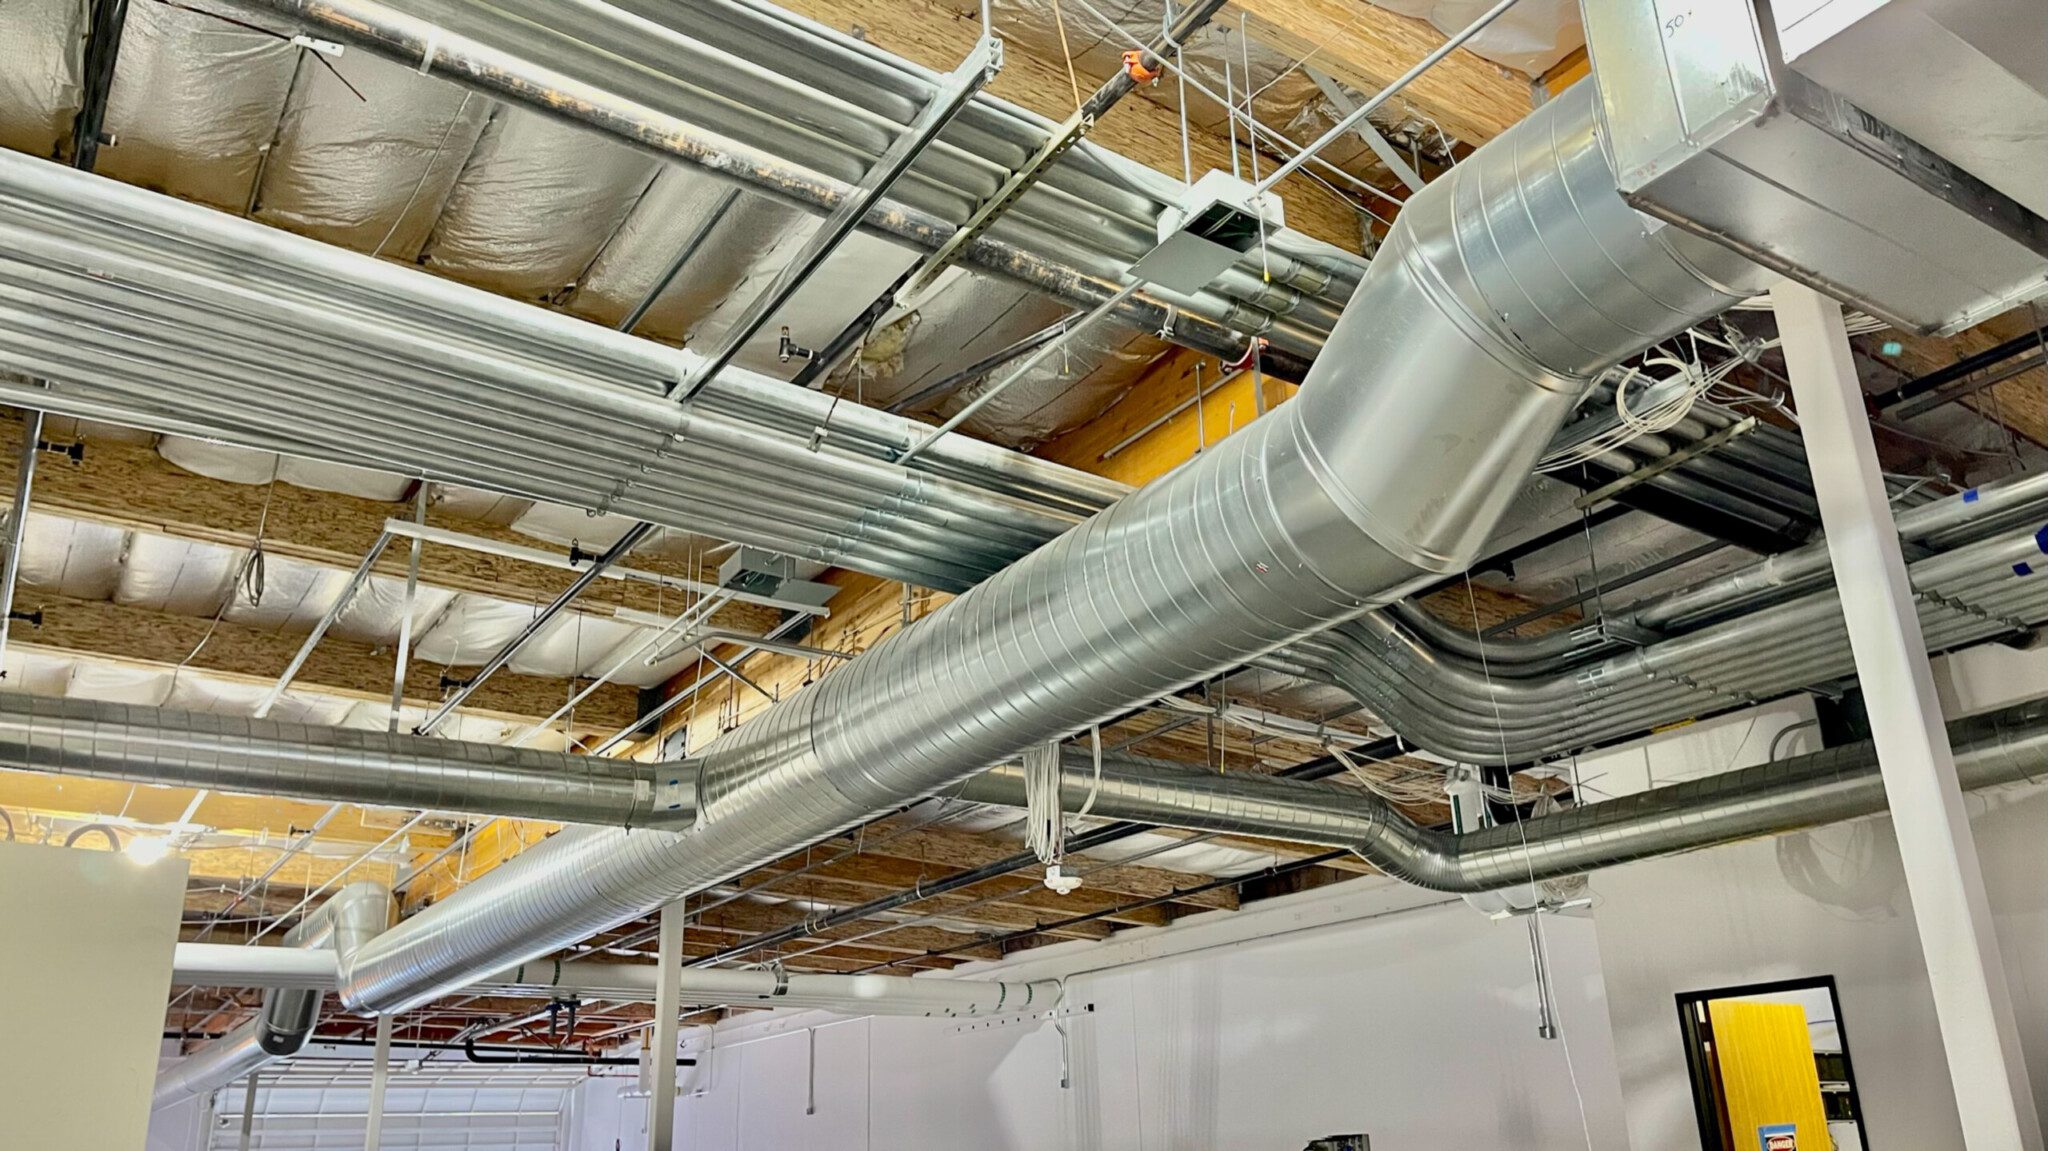 Indoor airflow piping during early construction phase